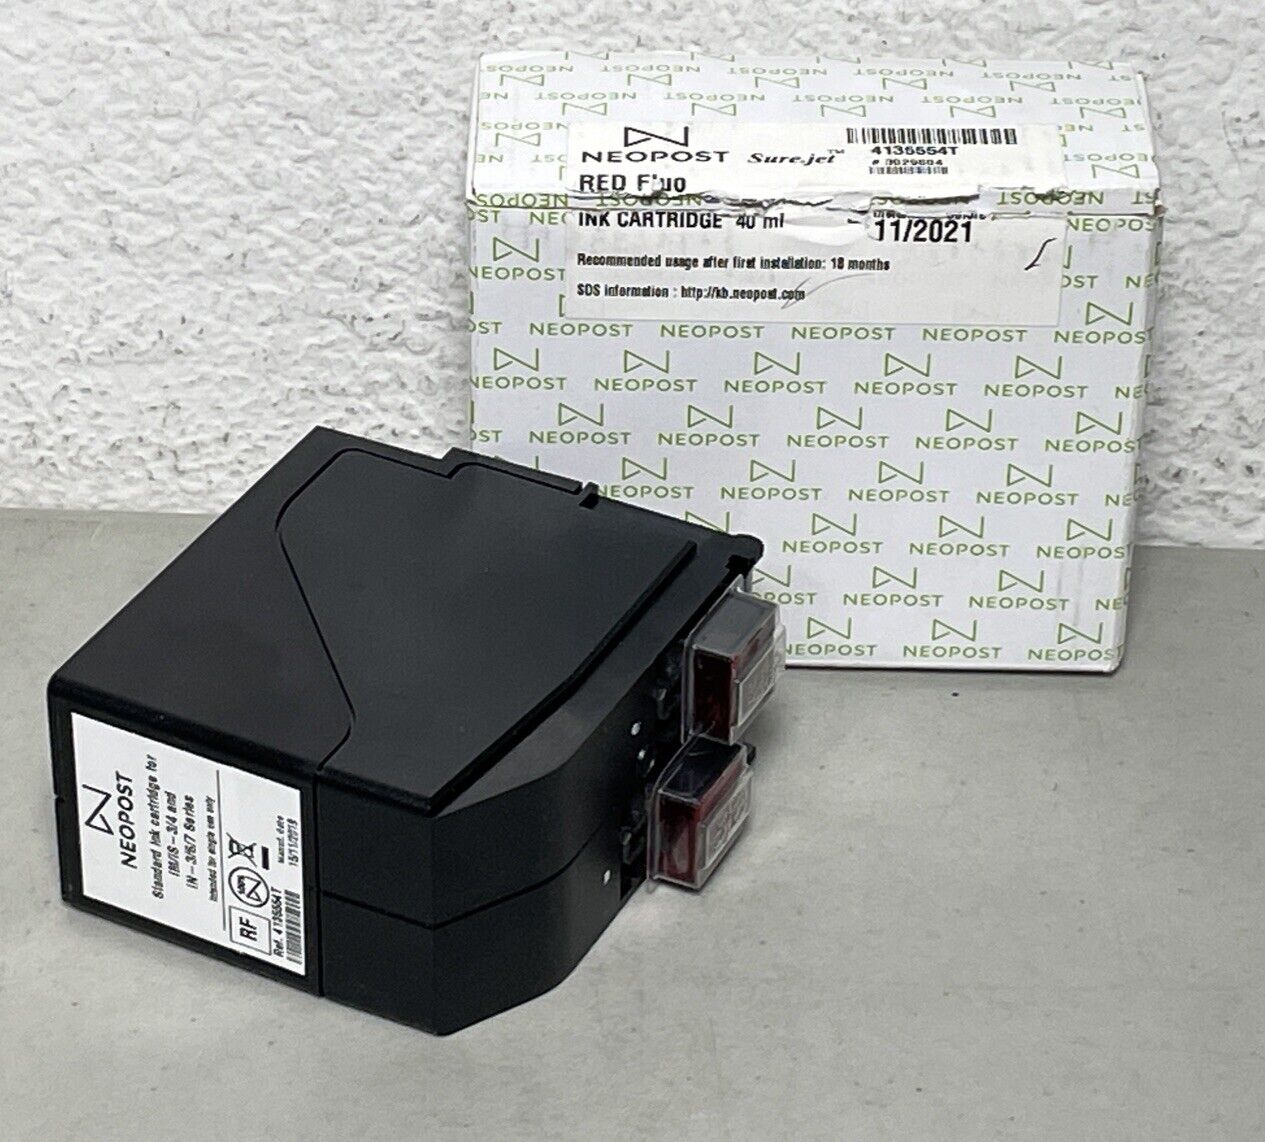 Neopost Red Flou Ink Cartridge 40 ml Exp 11/2021 4135554T - Open Box